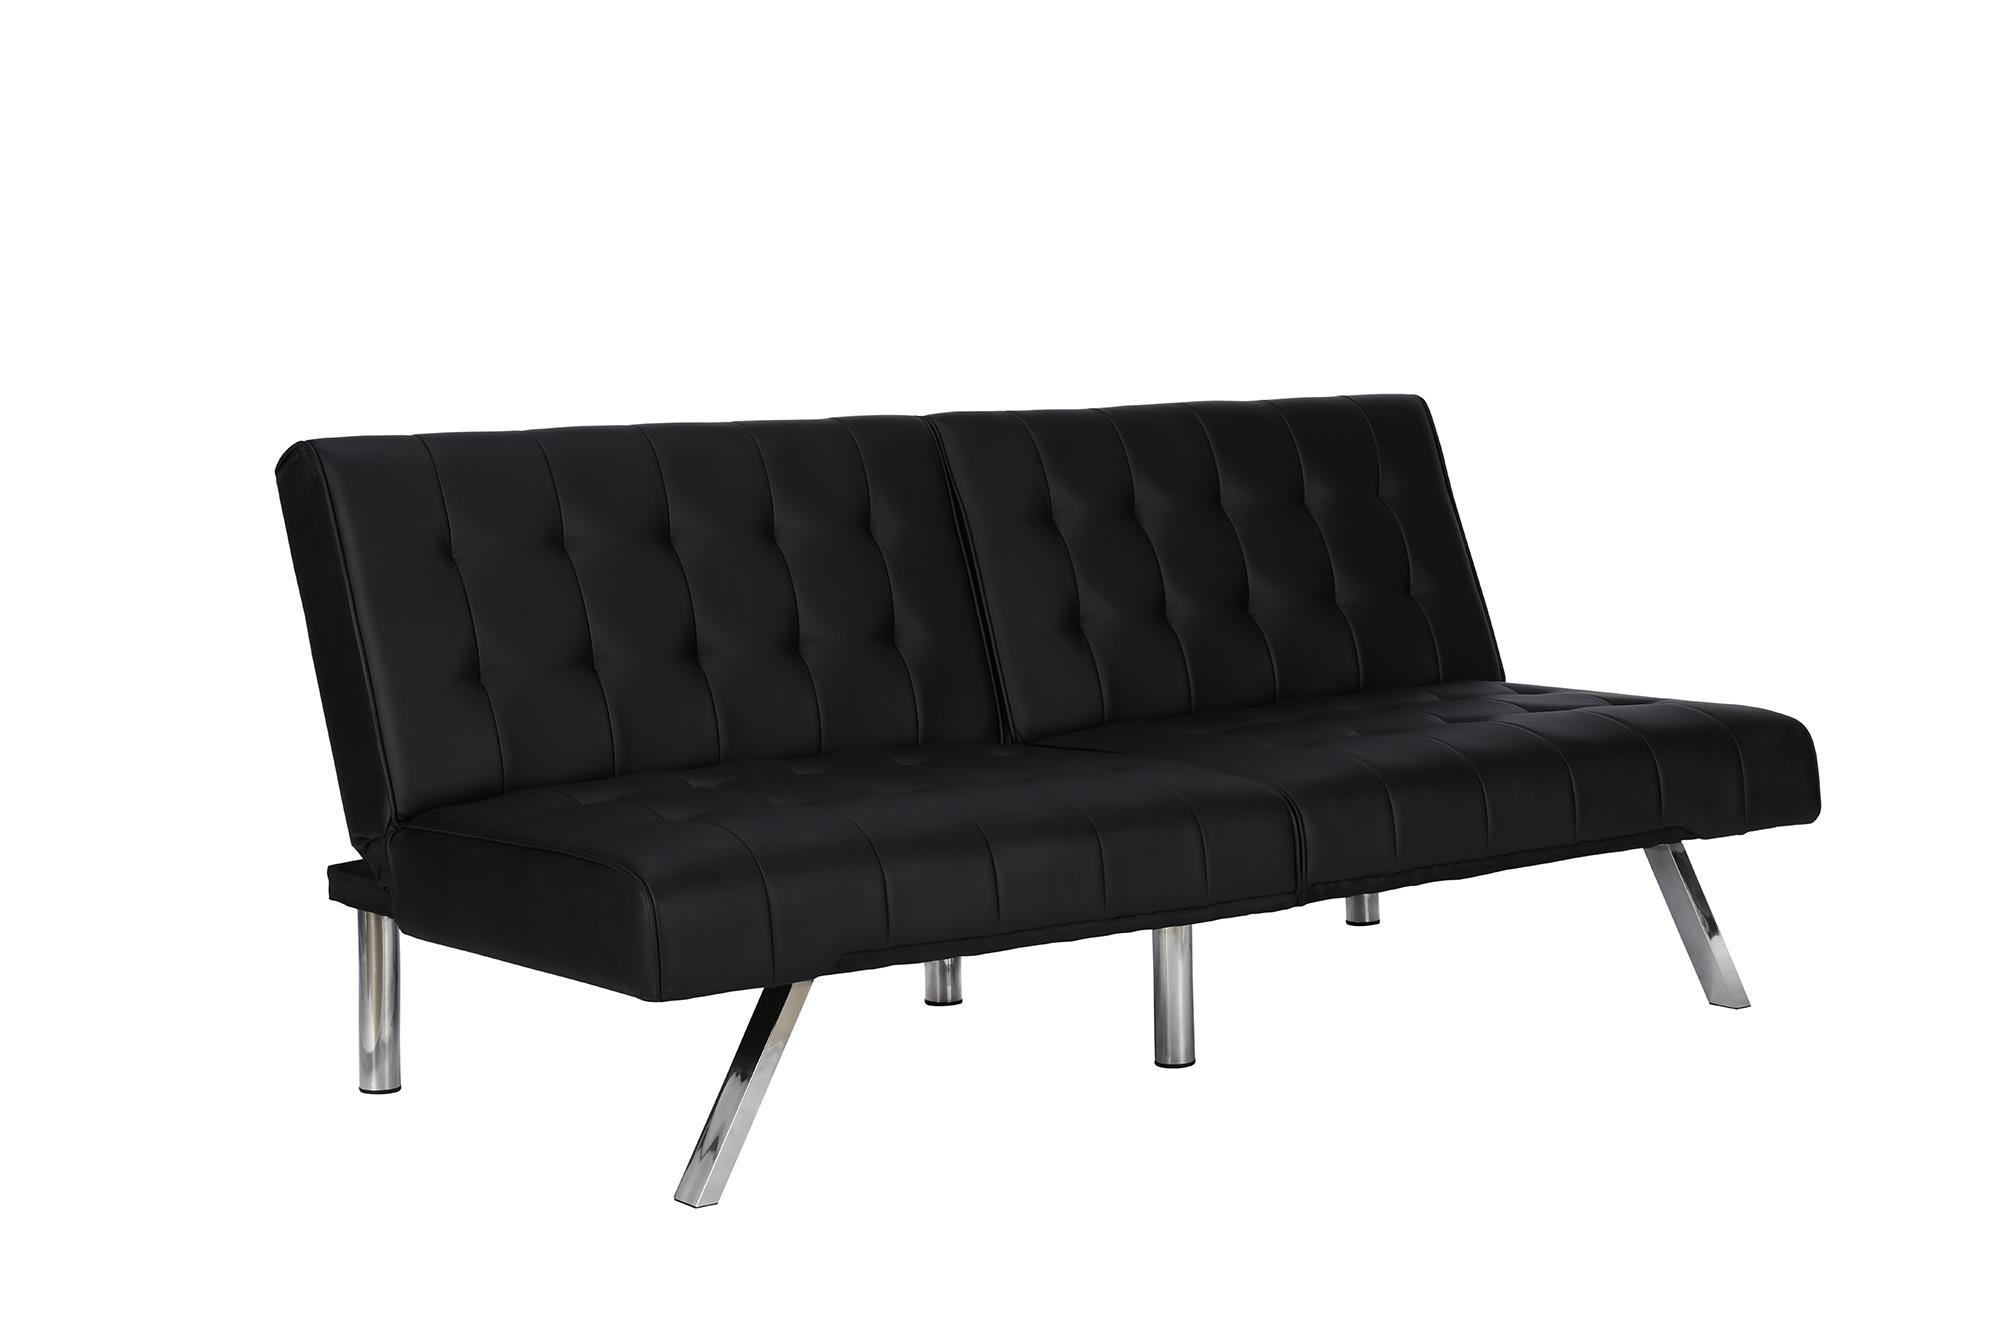 River Street Designs Emily Convertible Tufted Futon Sofa, Black Faux Leather - image 4 of 21